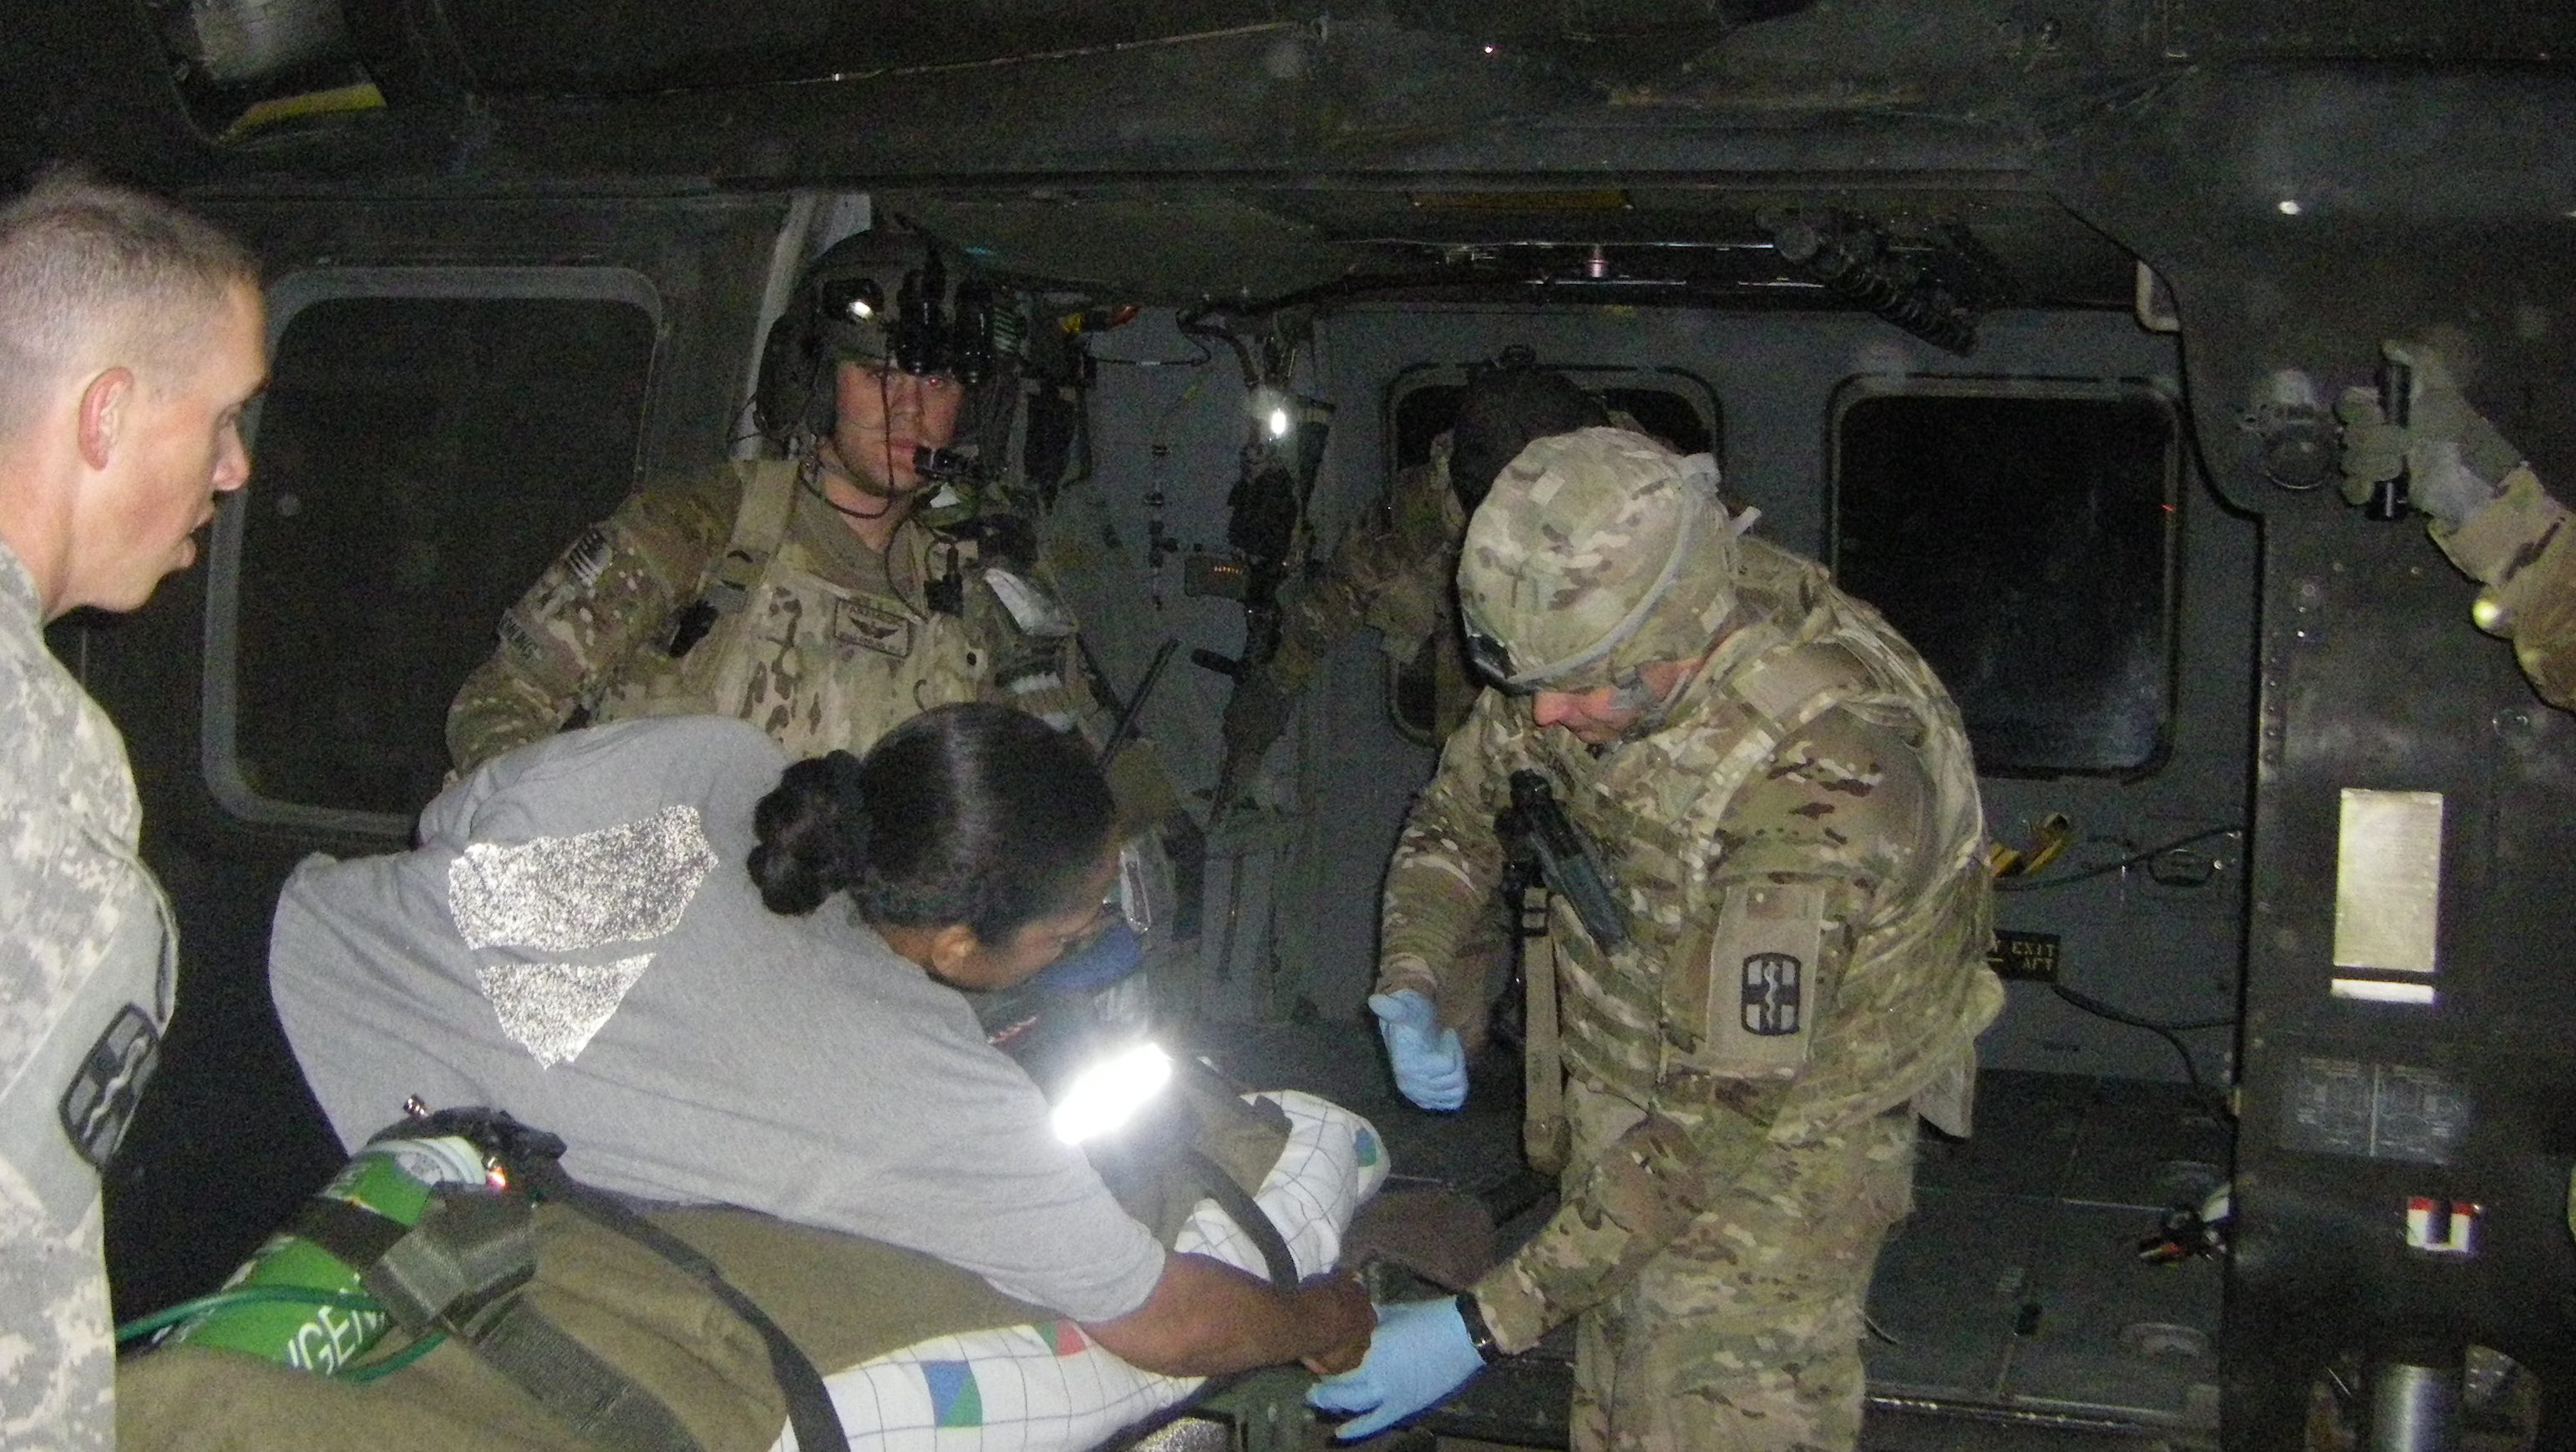 Jacob Caruso transporting a patient on a helicopter in Afghanistan